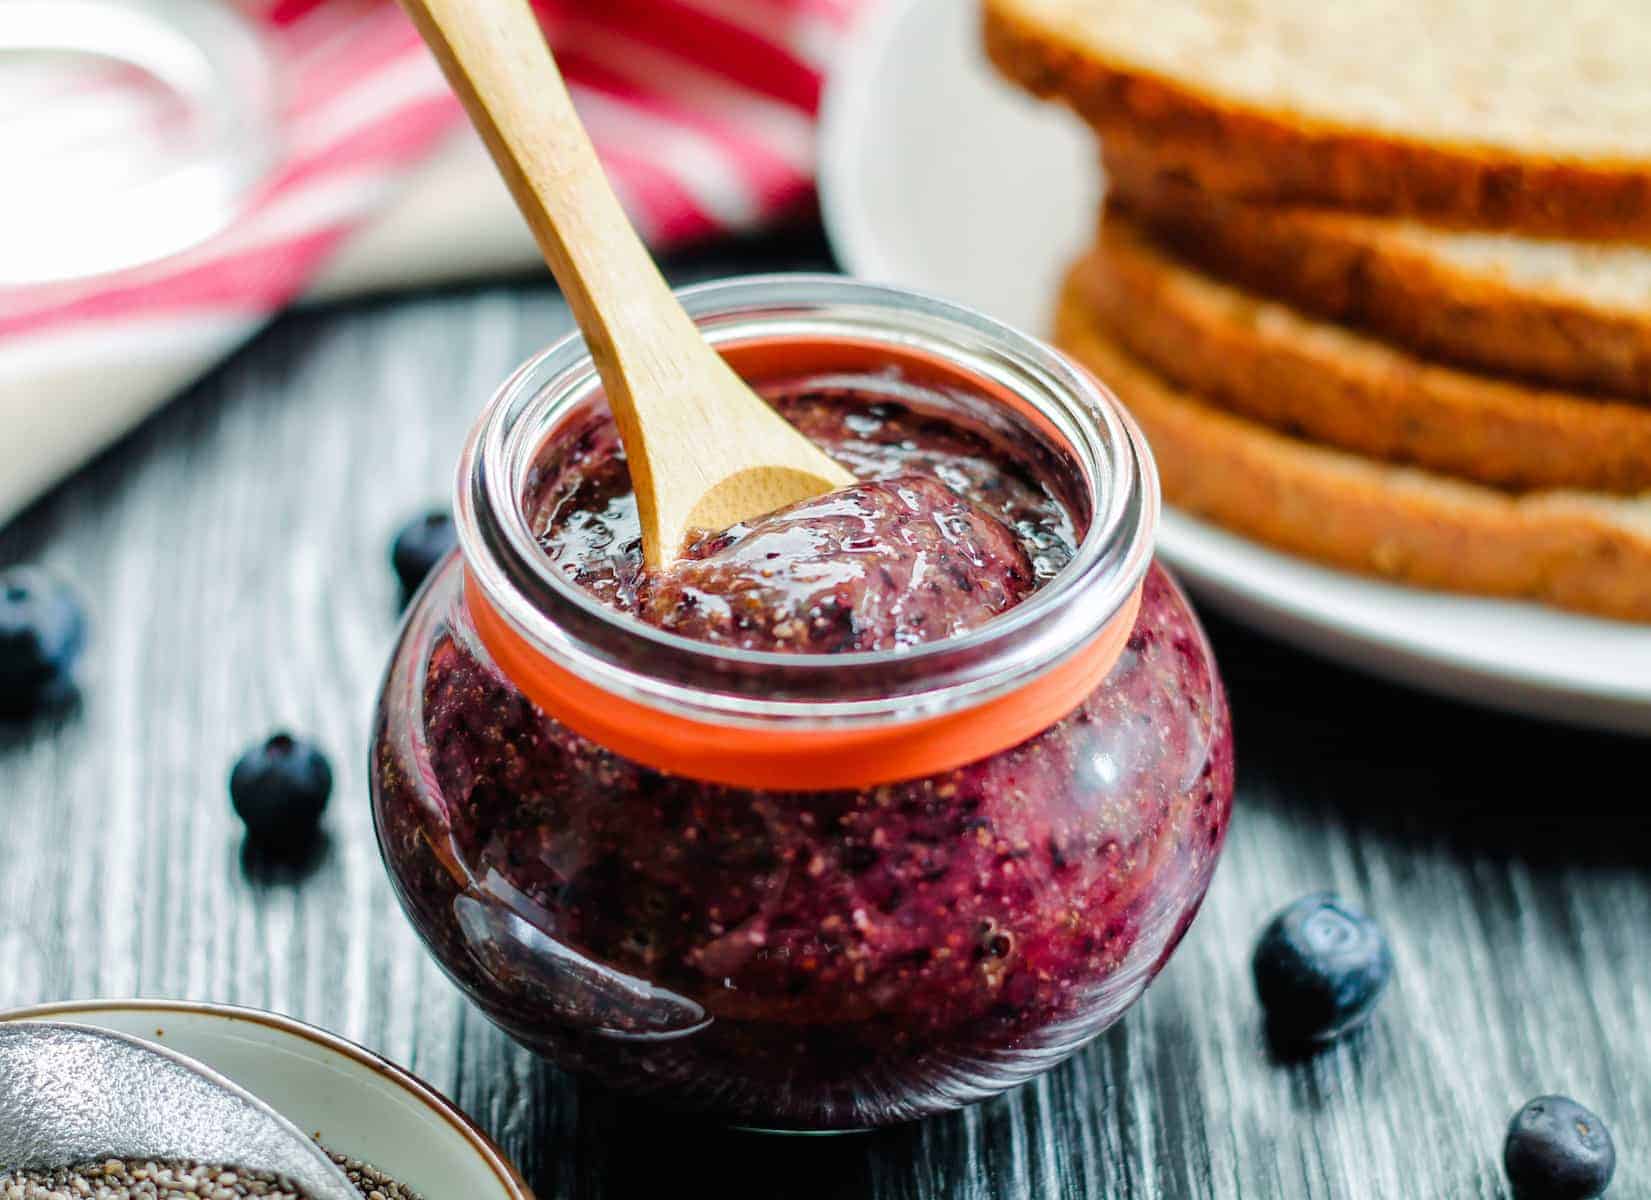 A jar of Blueberry Chia Jam with a spoon in it.